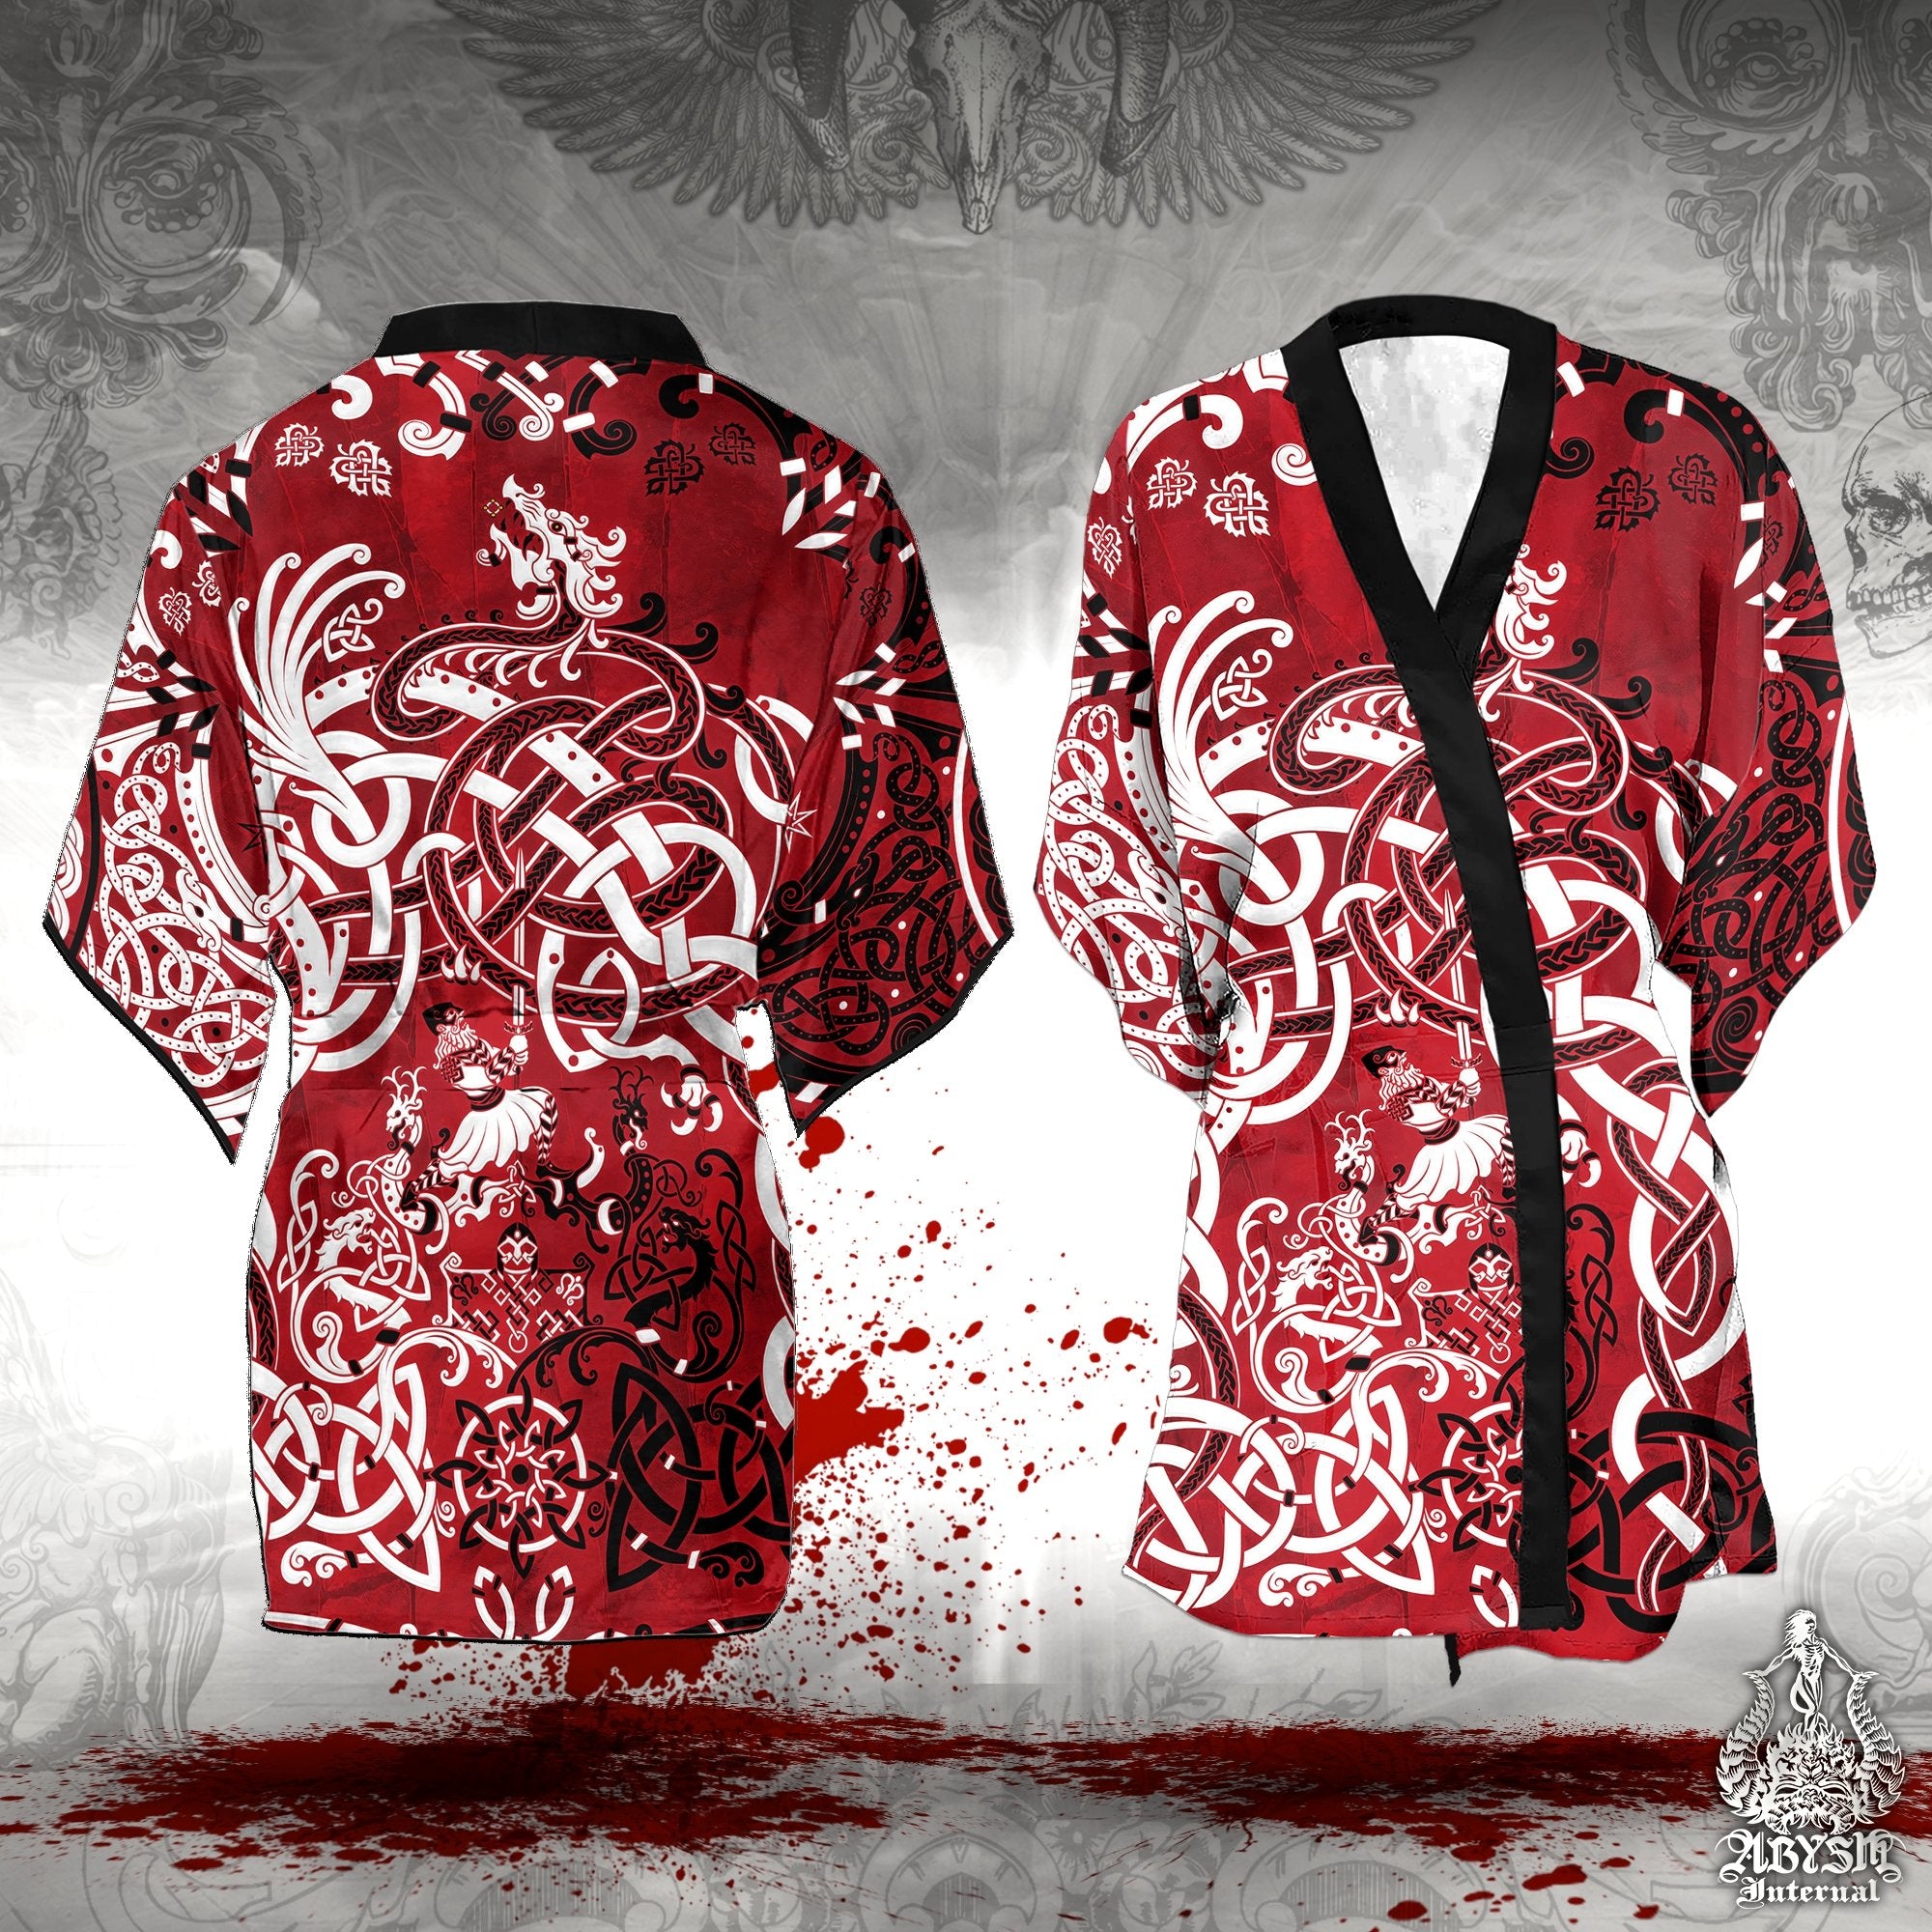 Viking Cover Up, Beach Outfit, Norse Party Kimono, Summer Festival Robe, Indie and Alternative Clothing, Unisex - Dragon Fafnir, Bloody Red Goth - Abysm Internal